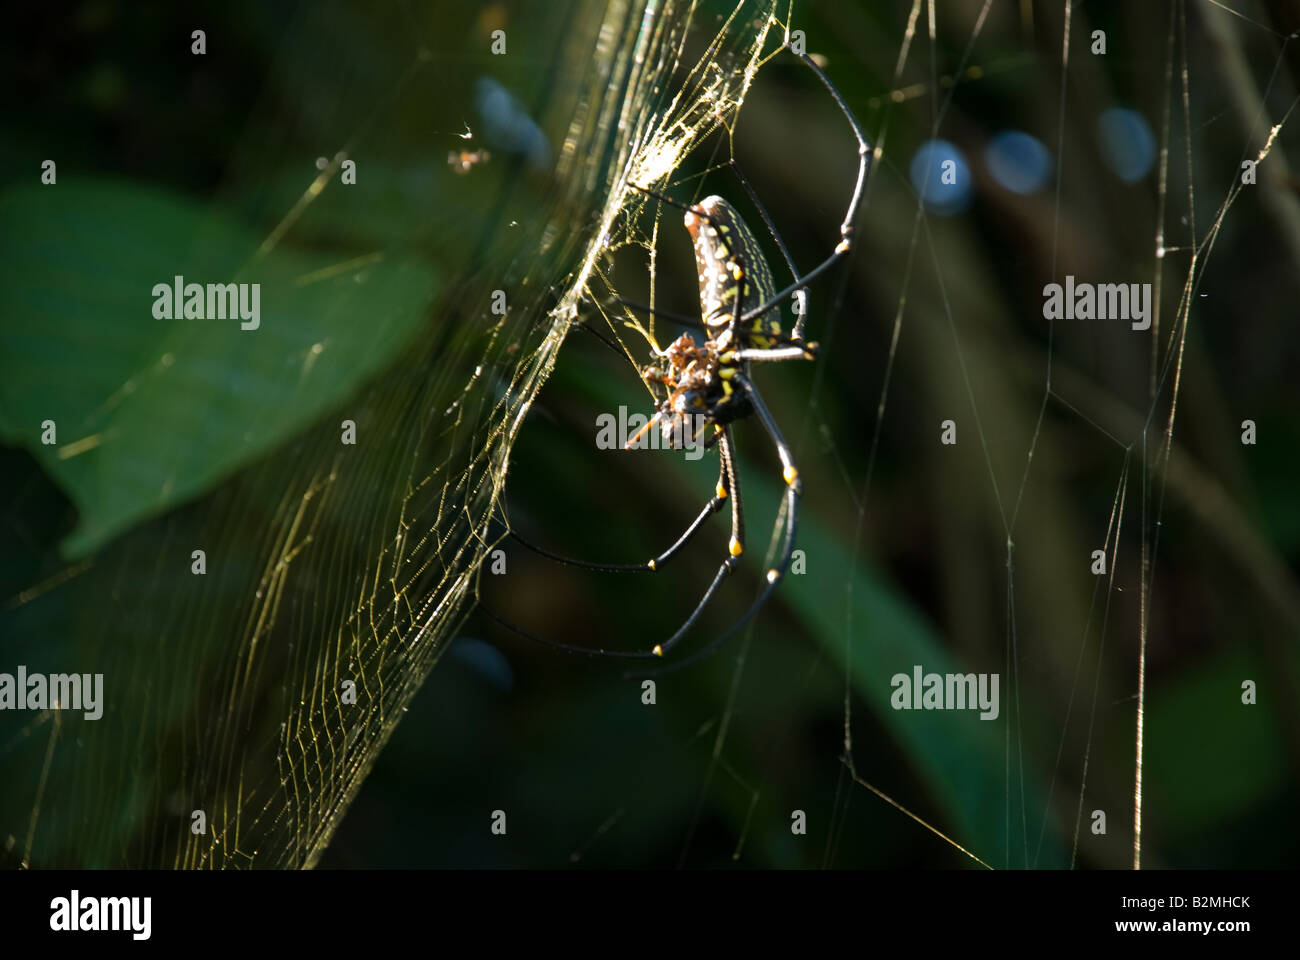 bali indonesia spider big web scary creepy crawly insect wildlife jungle tropical Stock Photo